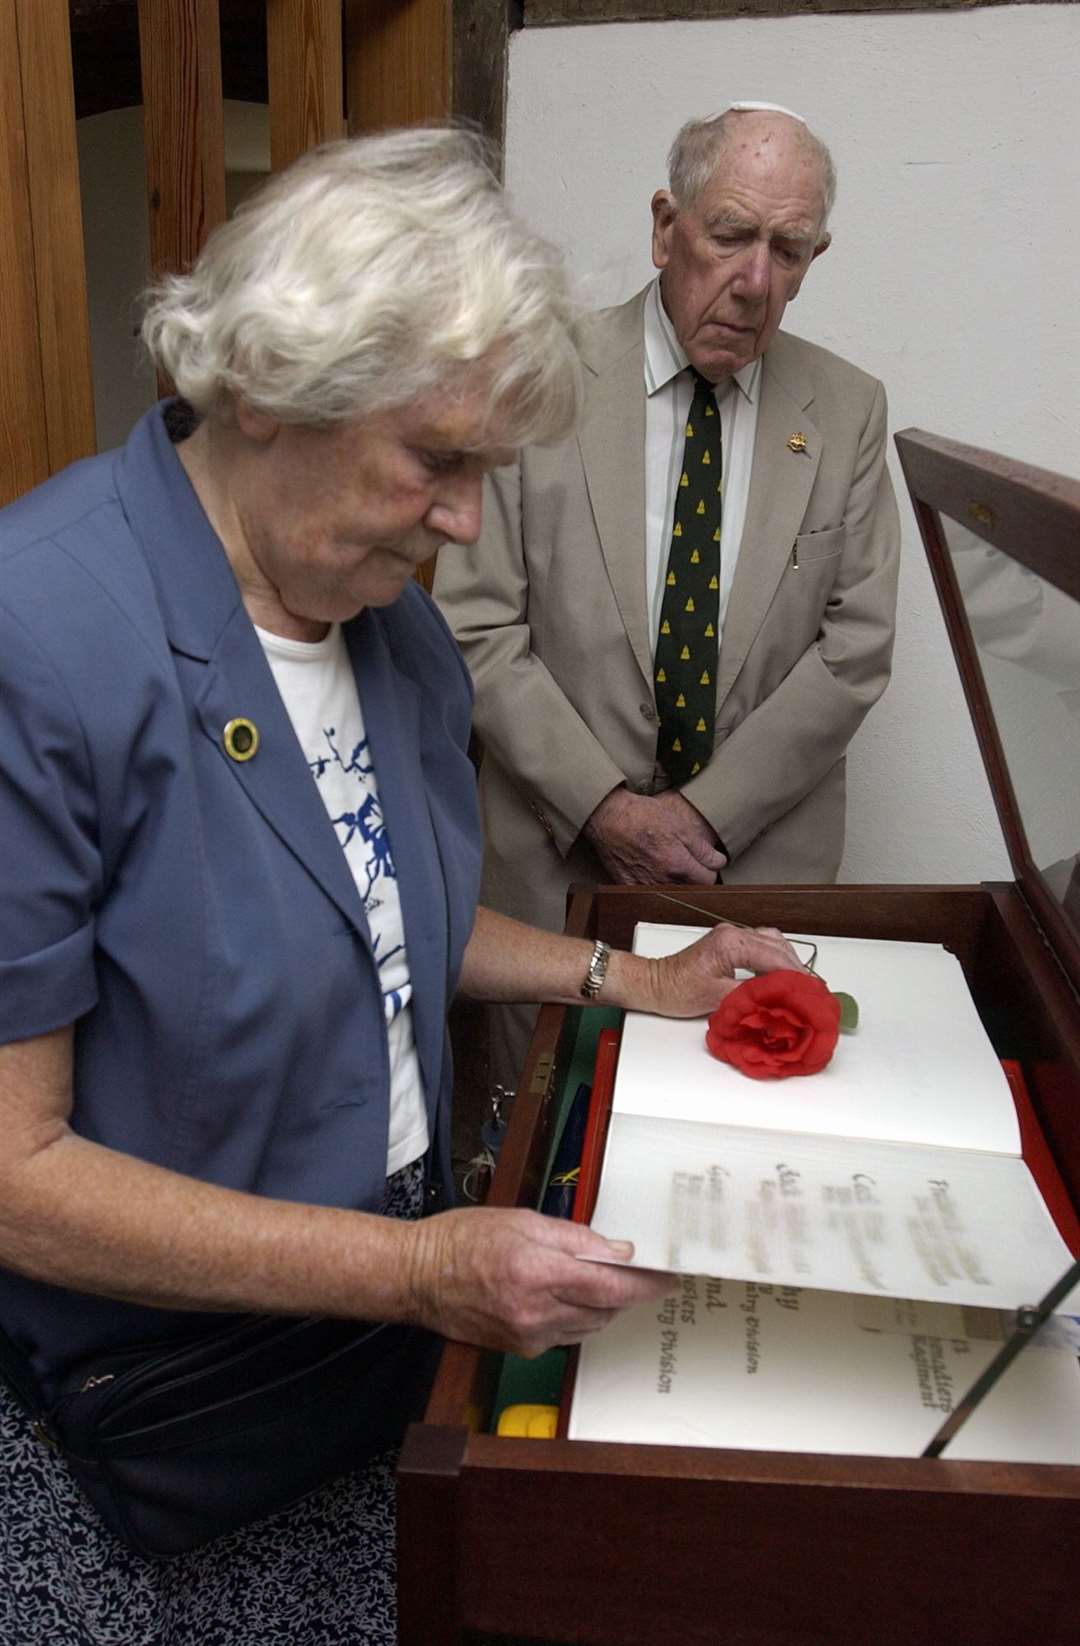 In 2005 Bill Breeze looked on as Edna Pullen turned the page in the book of remembrance at a previous page turning ceremony in 2005.